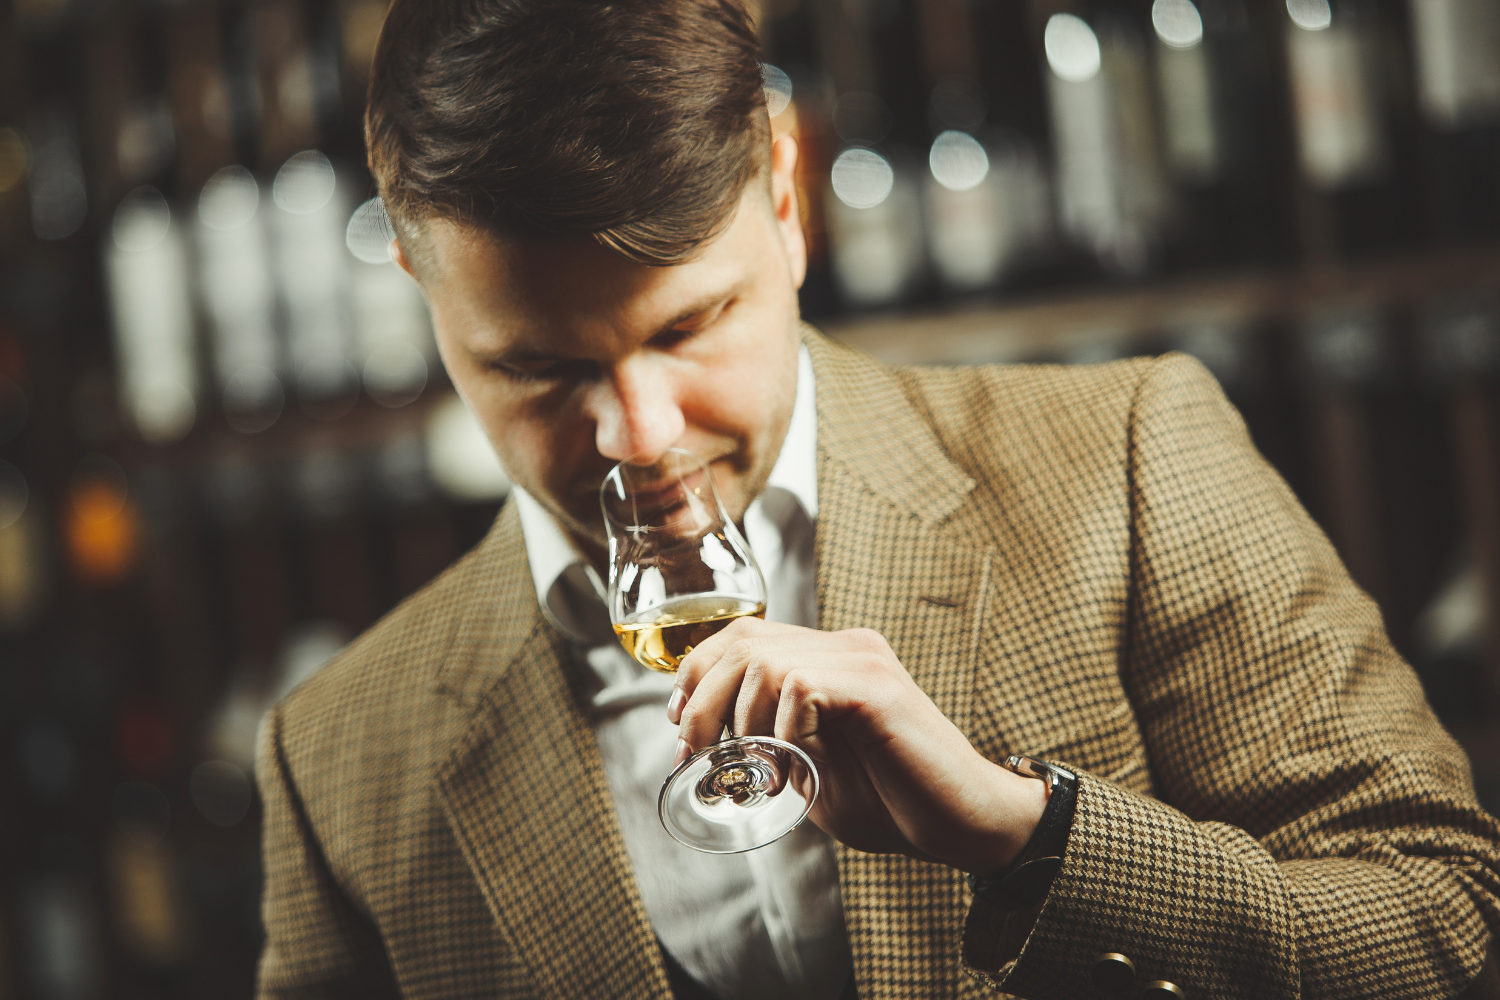 Smelling is the first step to appreciating whiskey